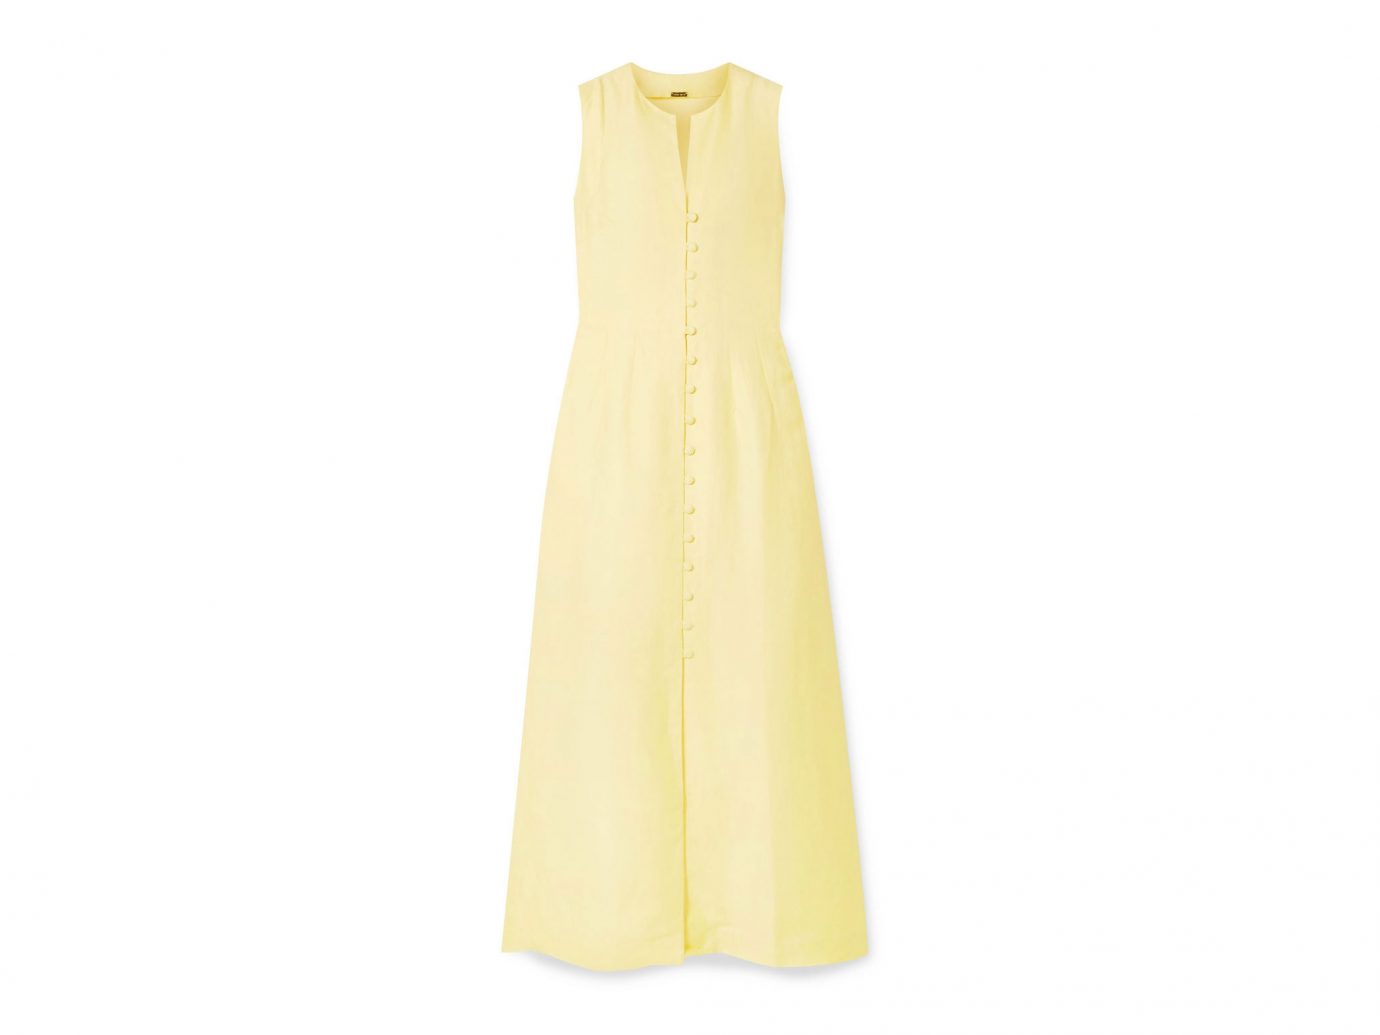 pale yellow linen-blend midi dress from Cult Gaia